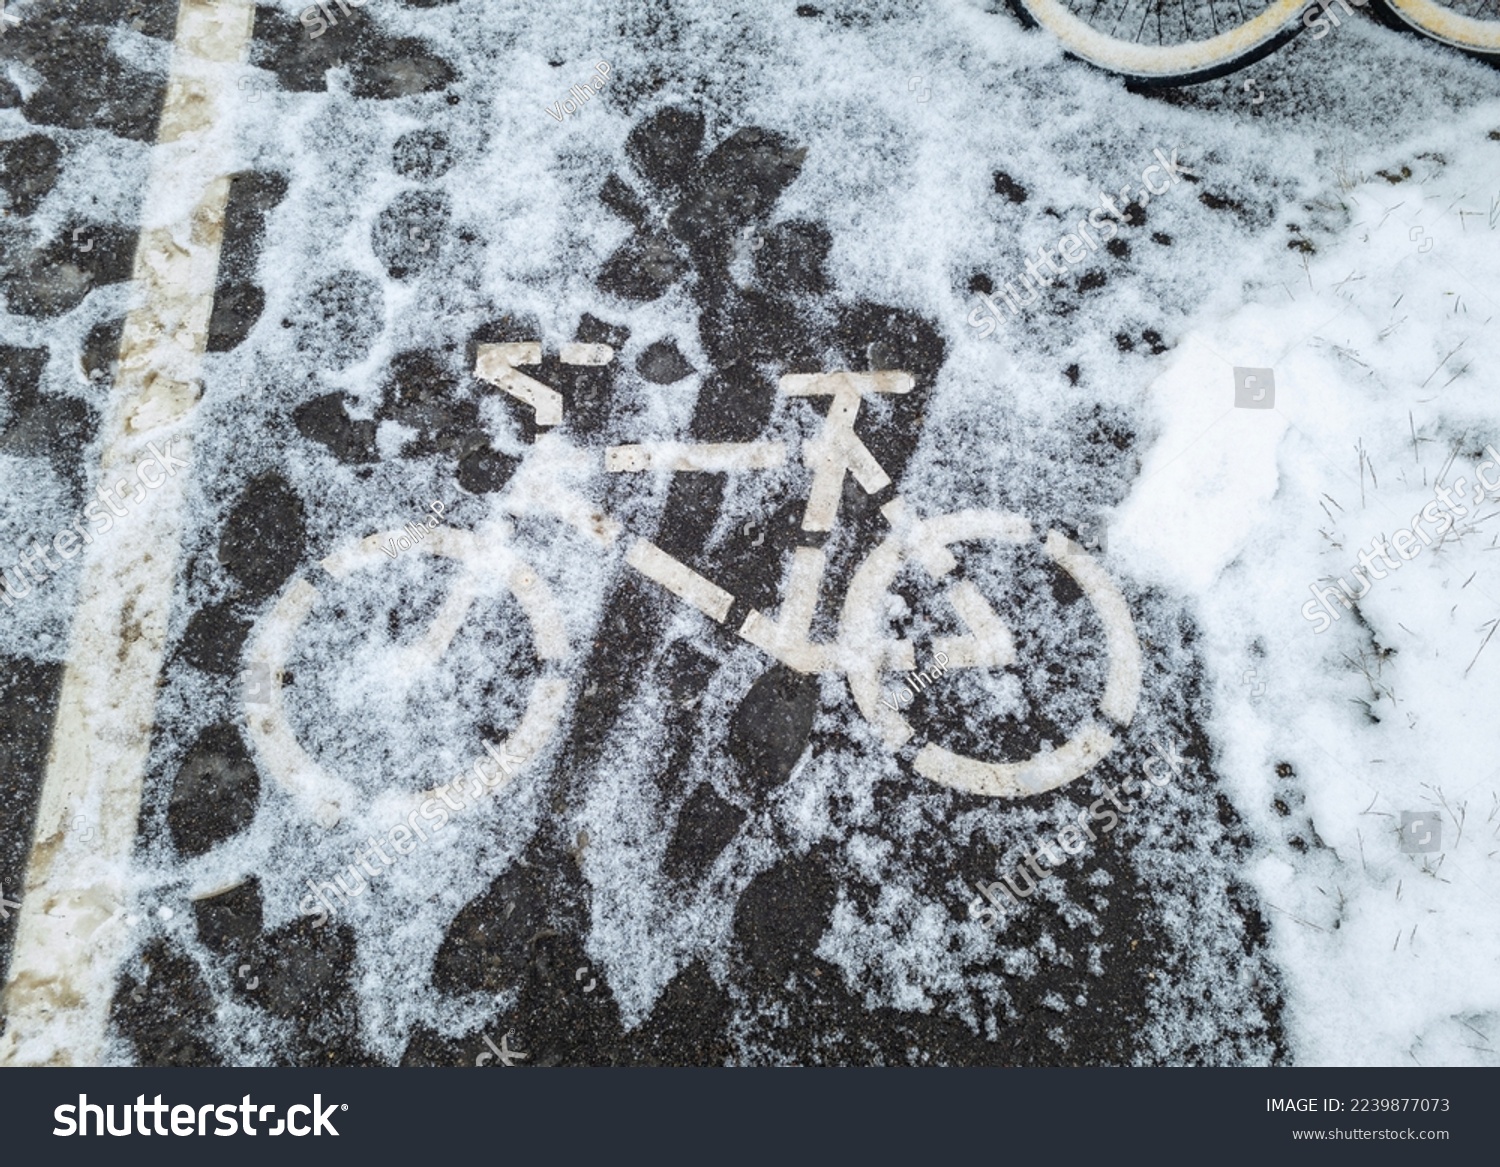 The sign of the bike path on the asphalt covered with fallen snow. Winter weather in Europe. #2239877073